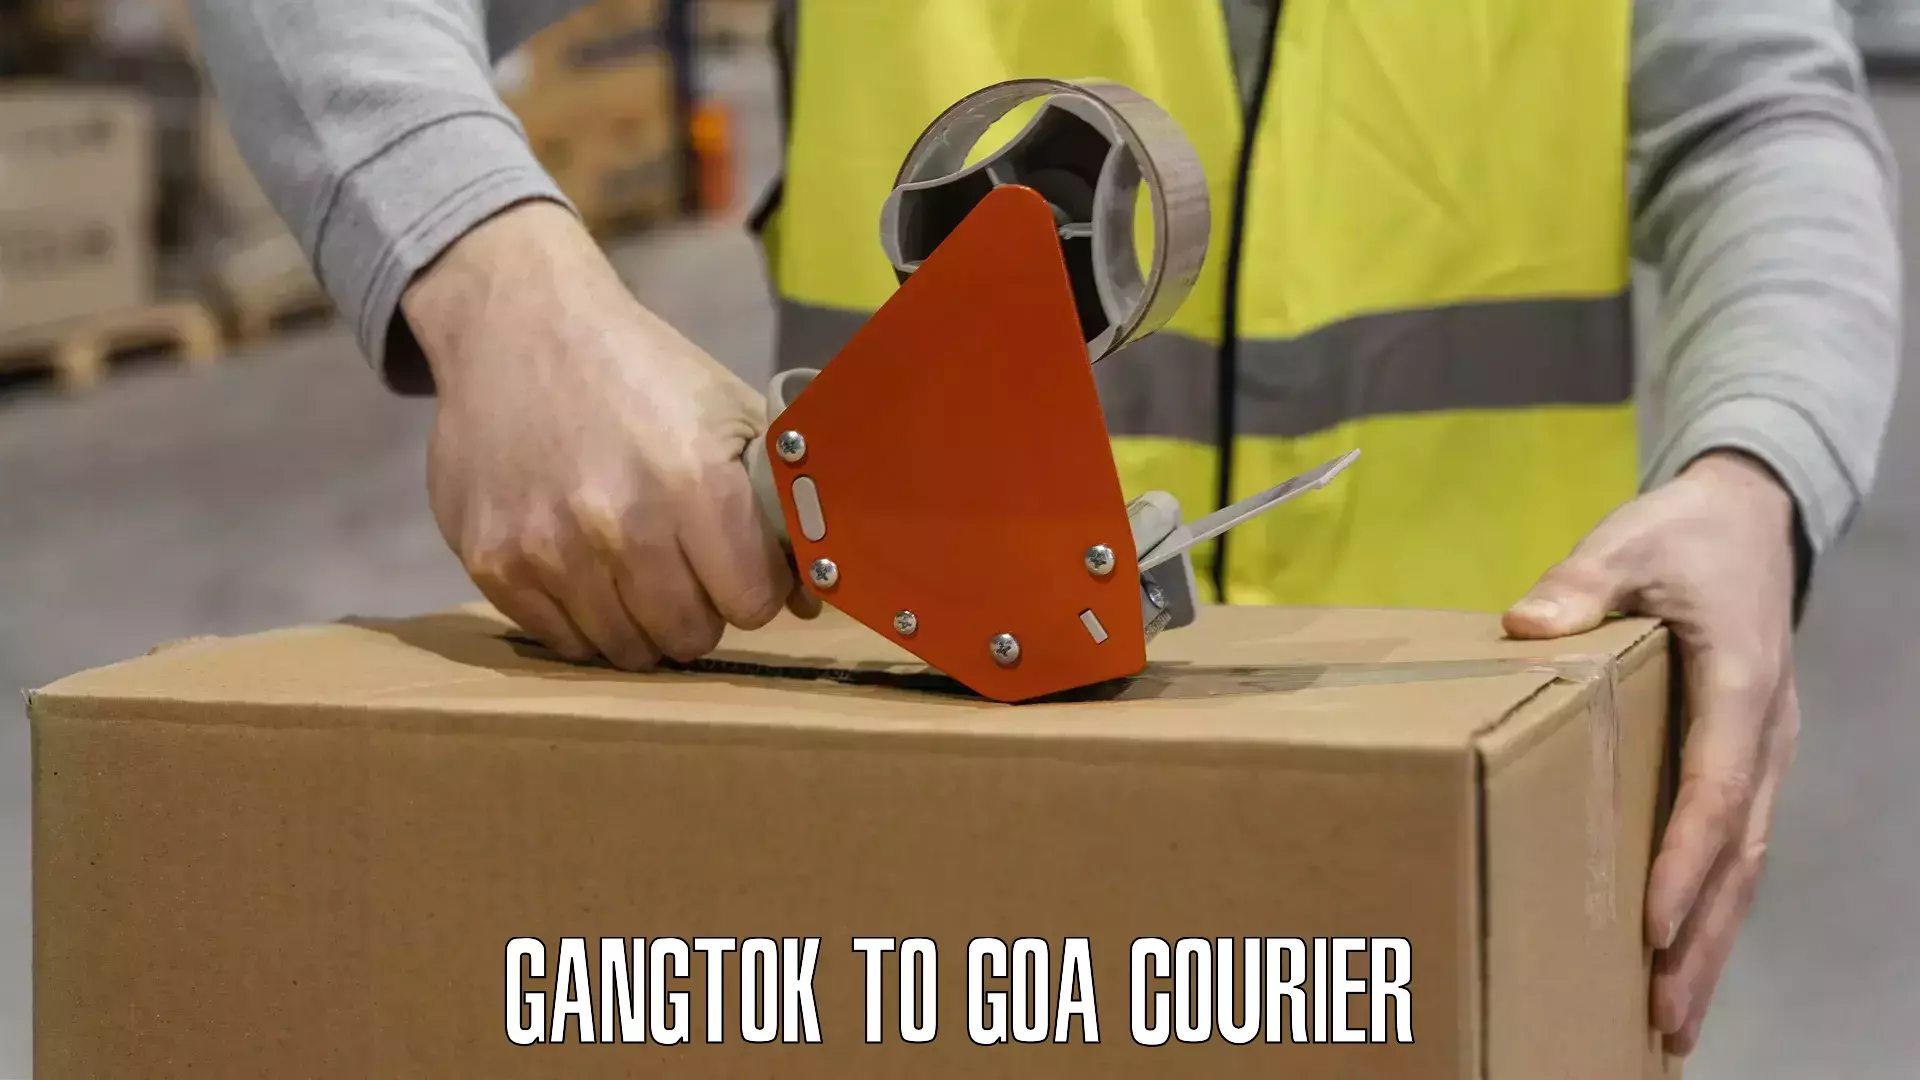 Automated parcel services Gangtok to South Goa